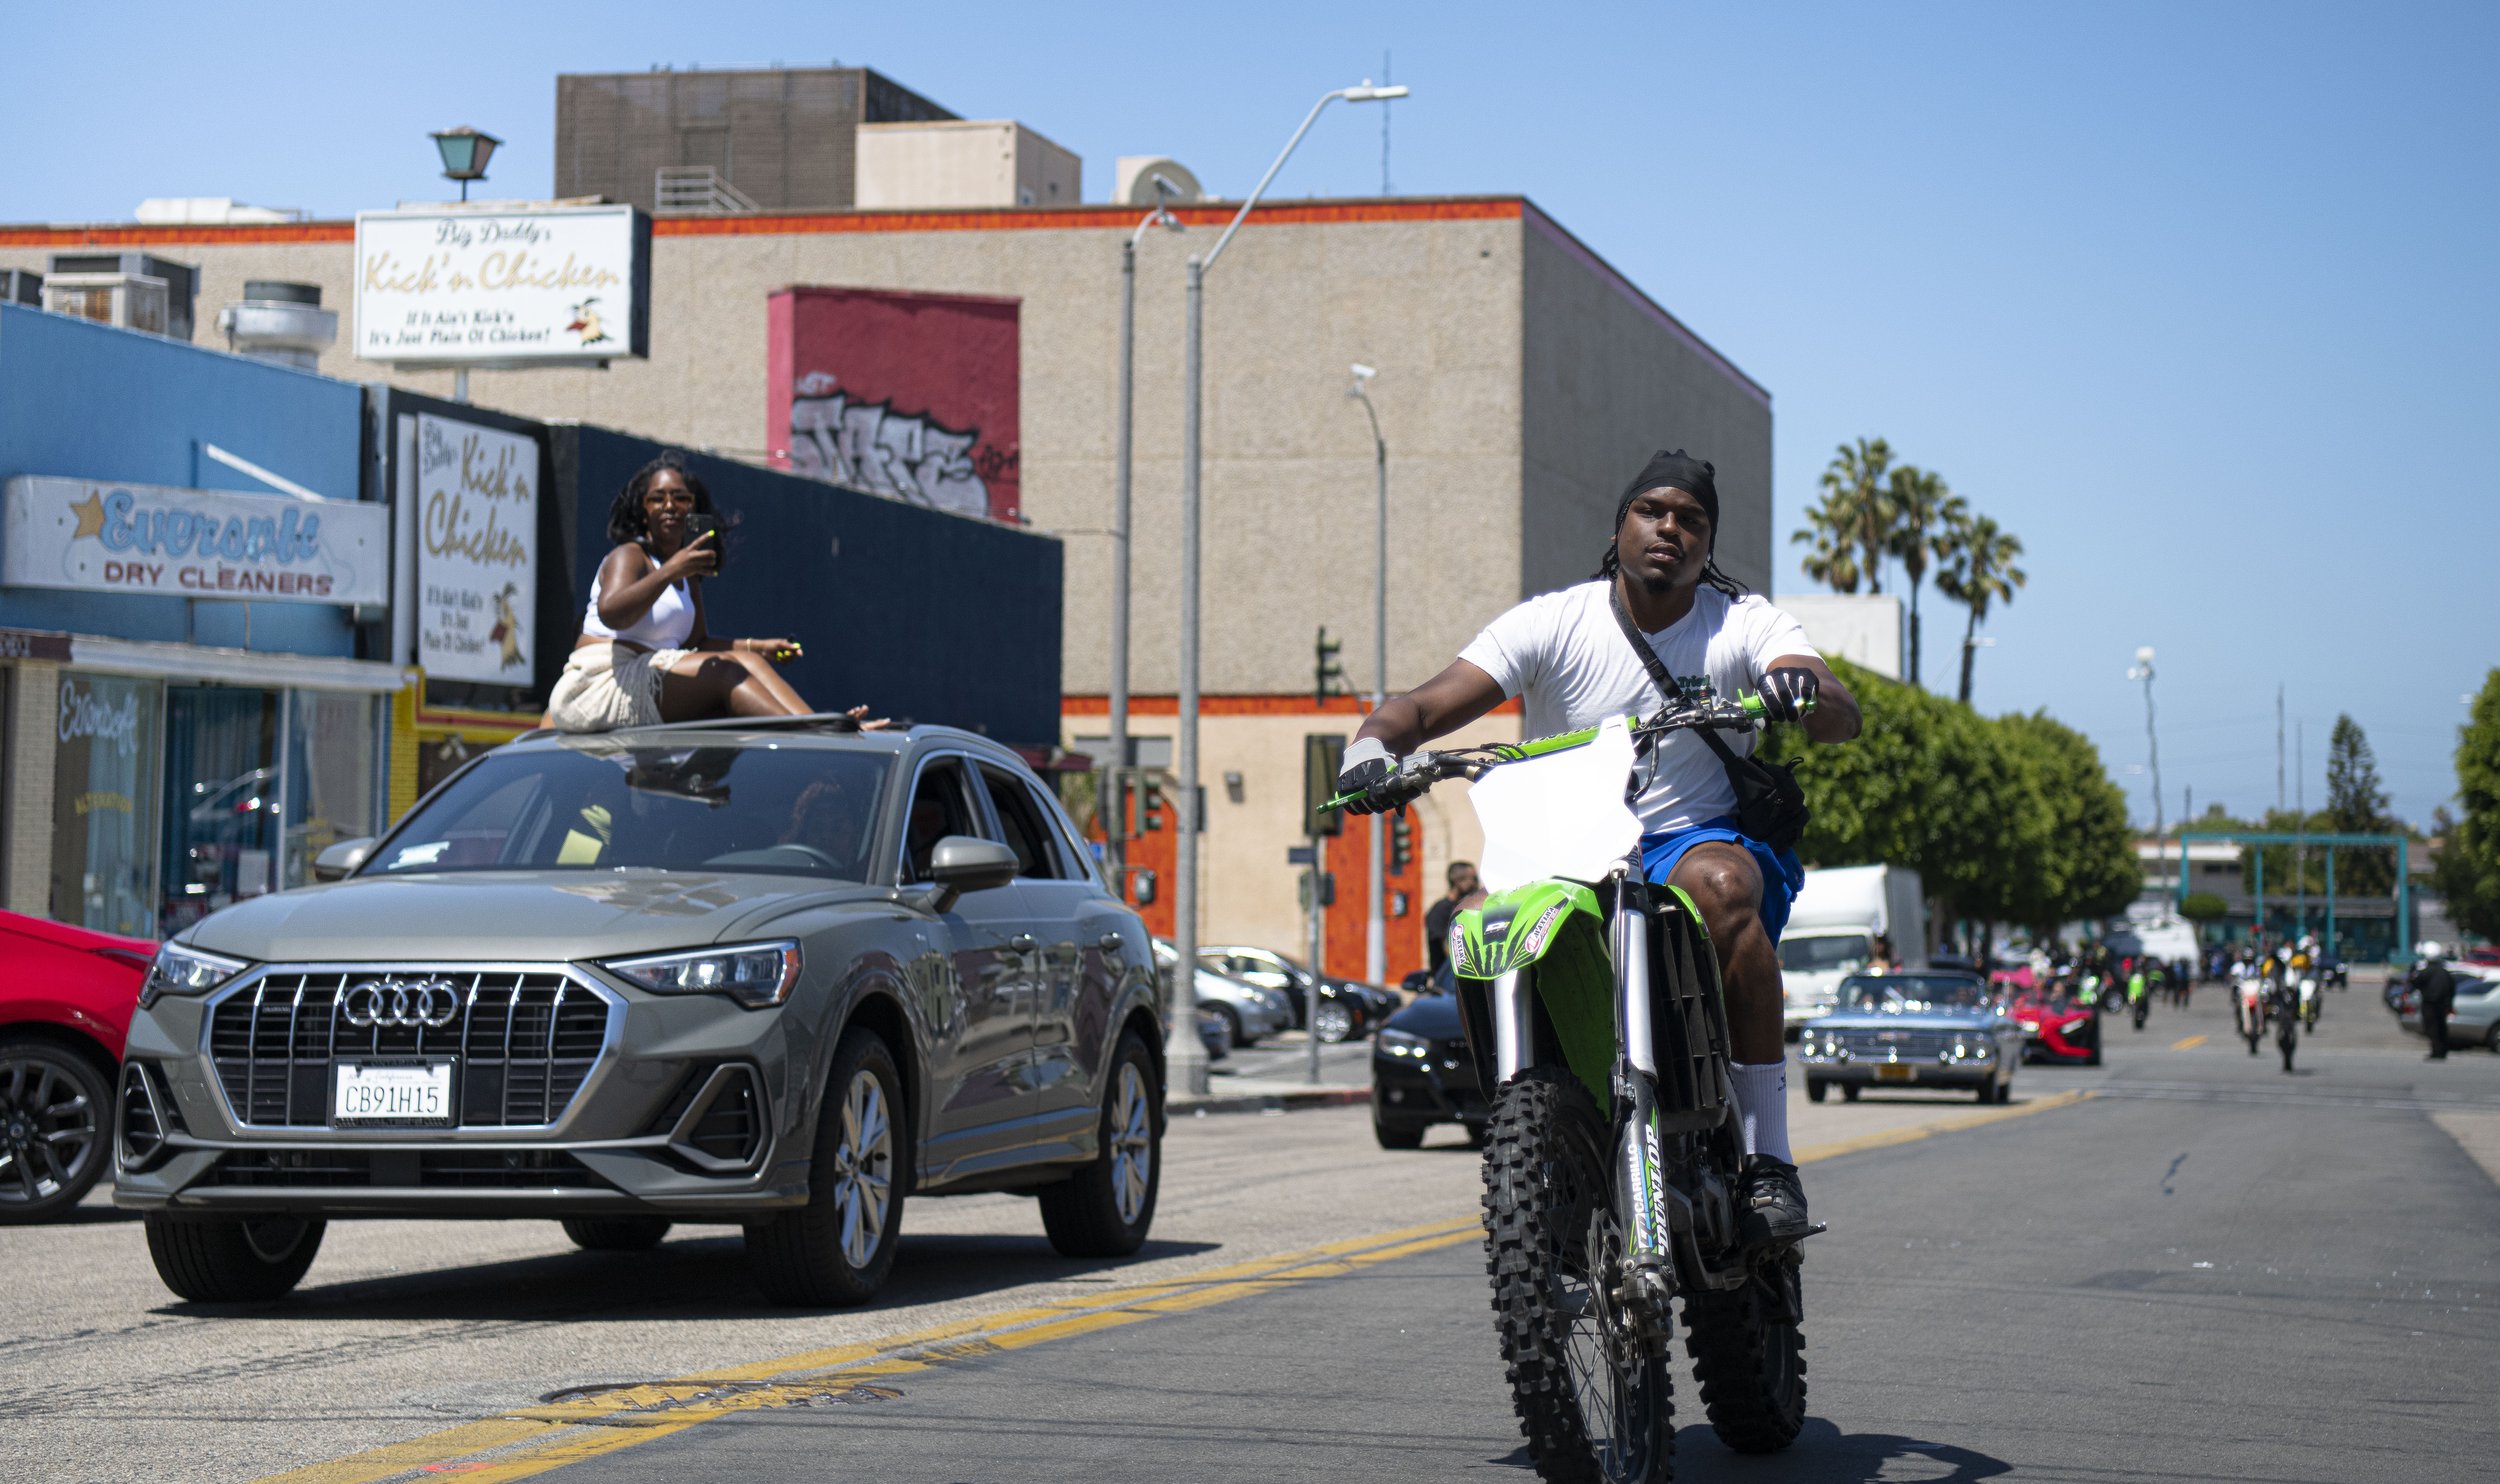  Juneteenth parade participants ride by during the scheduled parade through Inglewood, Calif. (Jon Putman | The Corsair) 